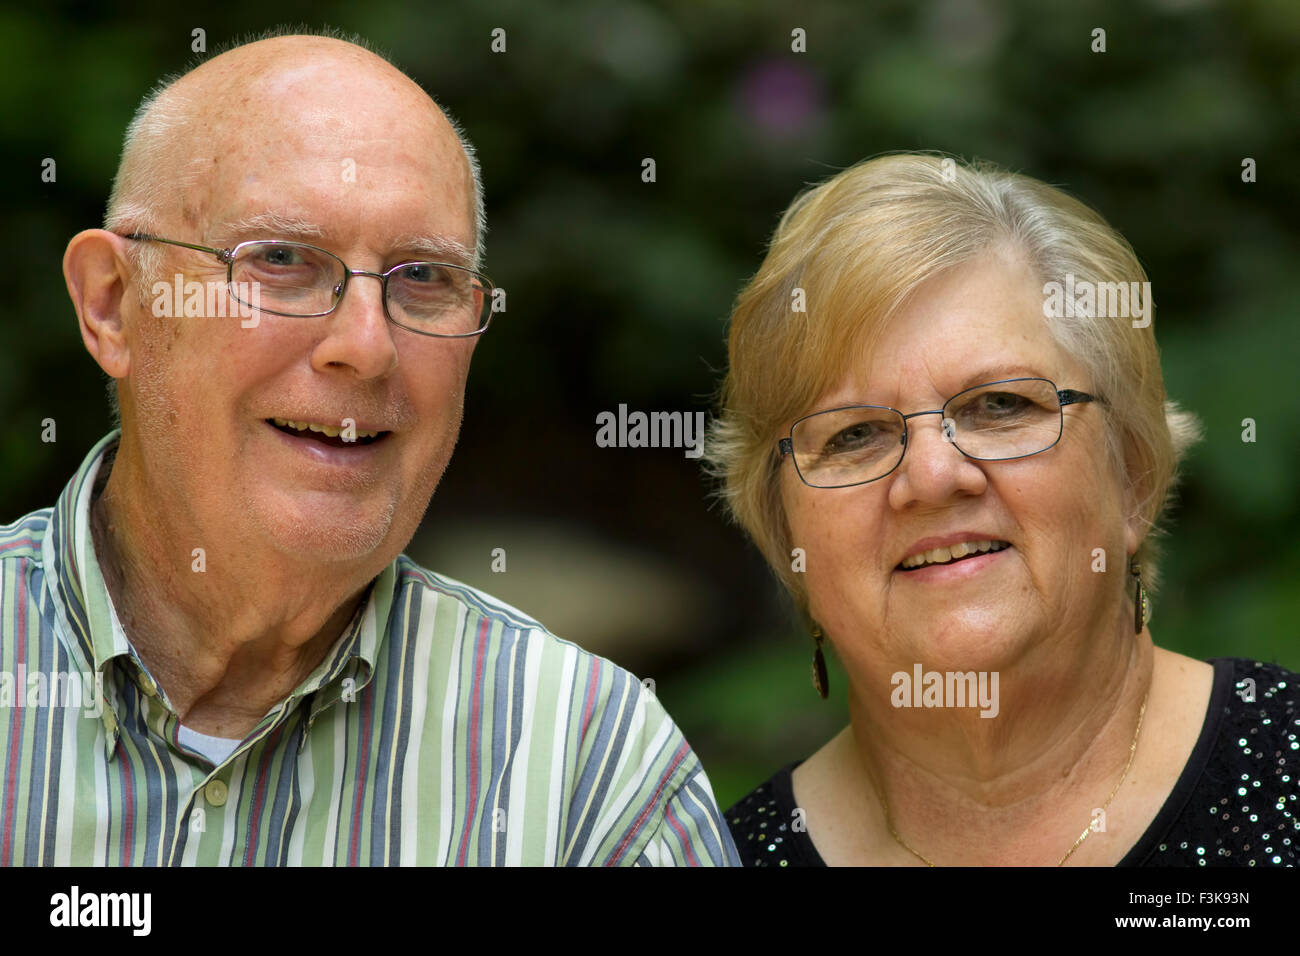 A happy looking senior couple smiling for the camera. Stock Photo